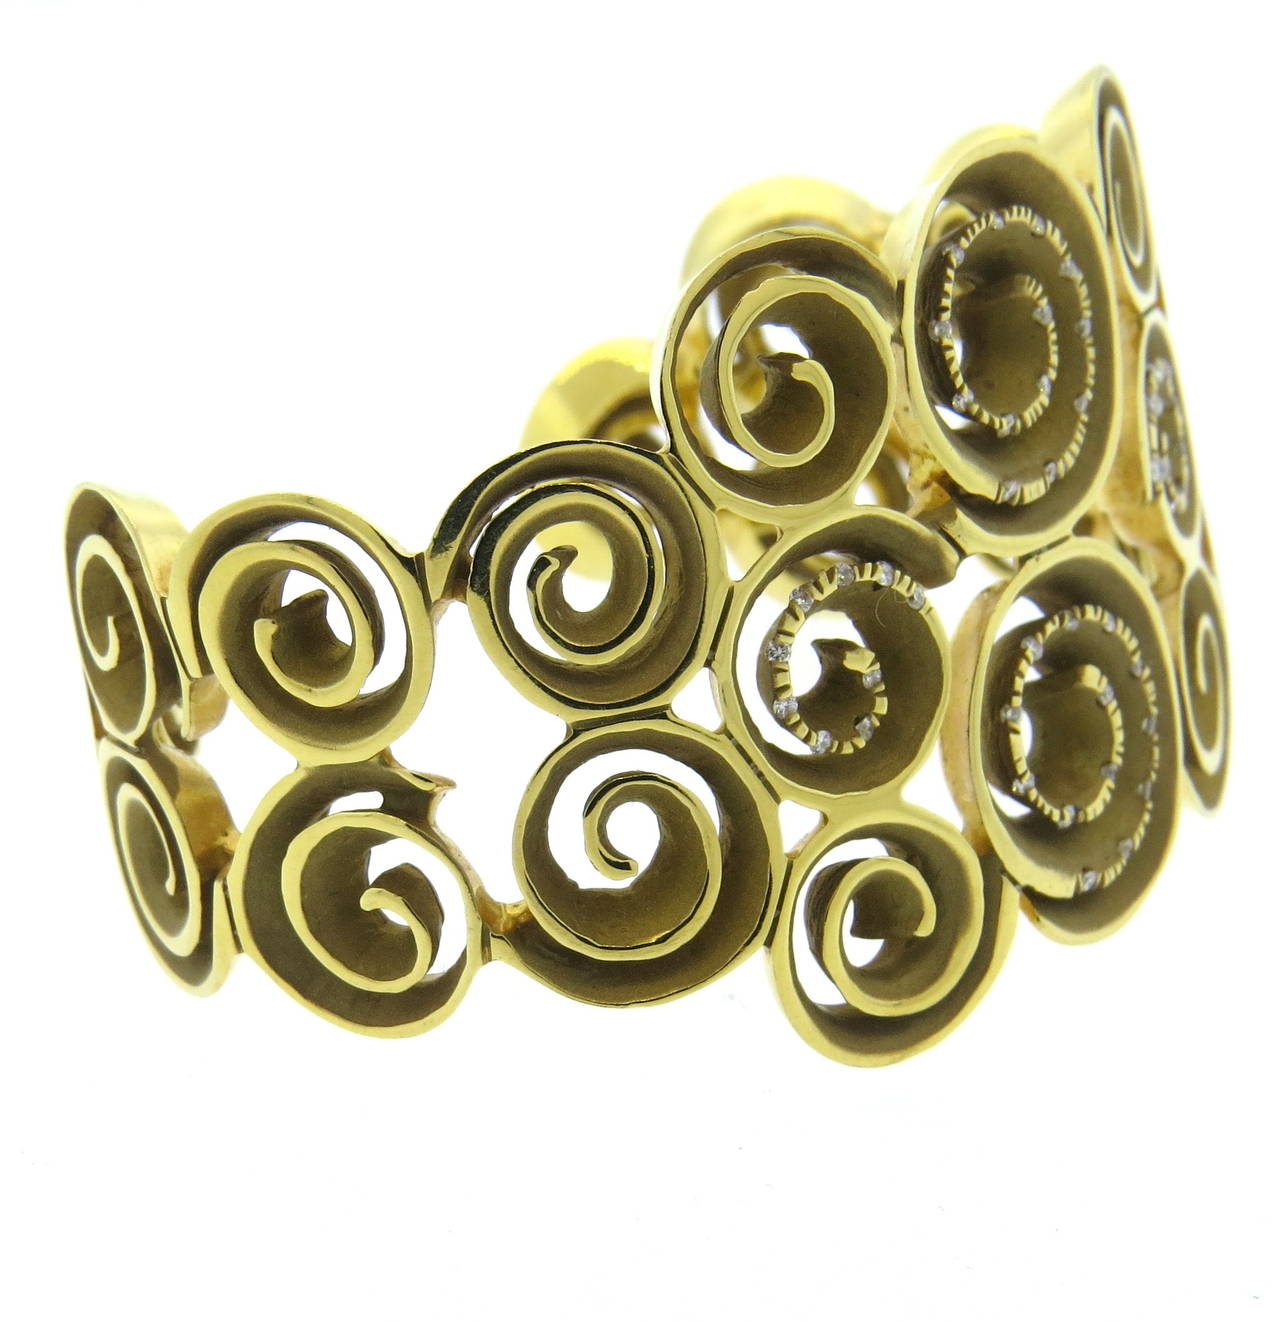 18k gold cuff bracelet by Links of London with diamonds. Cuff will fit up to 6 1/2